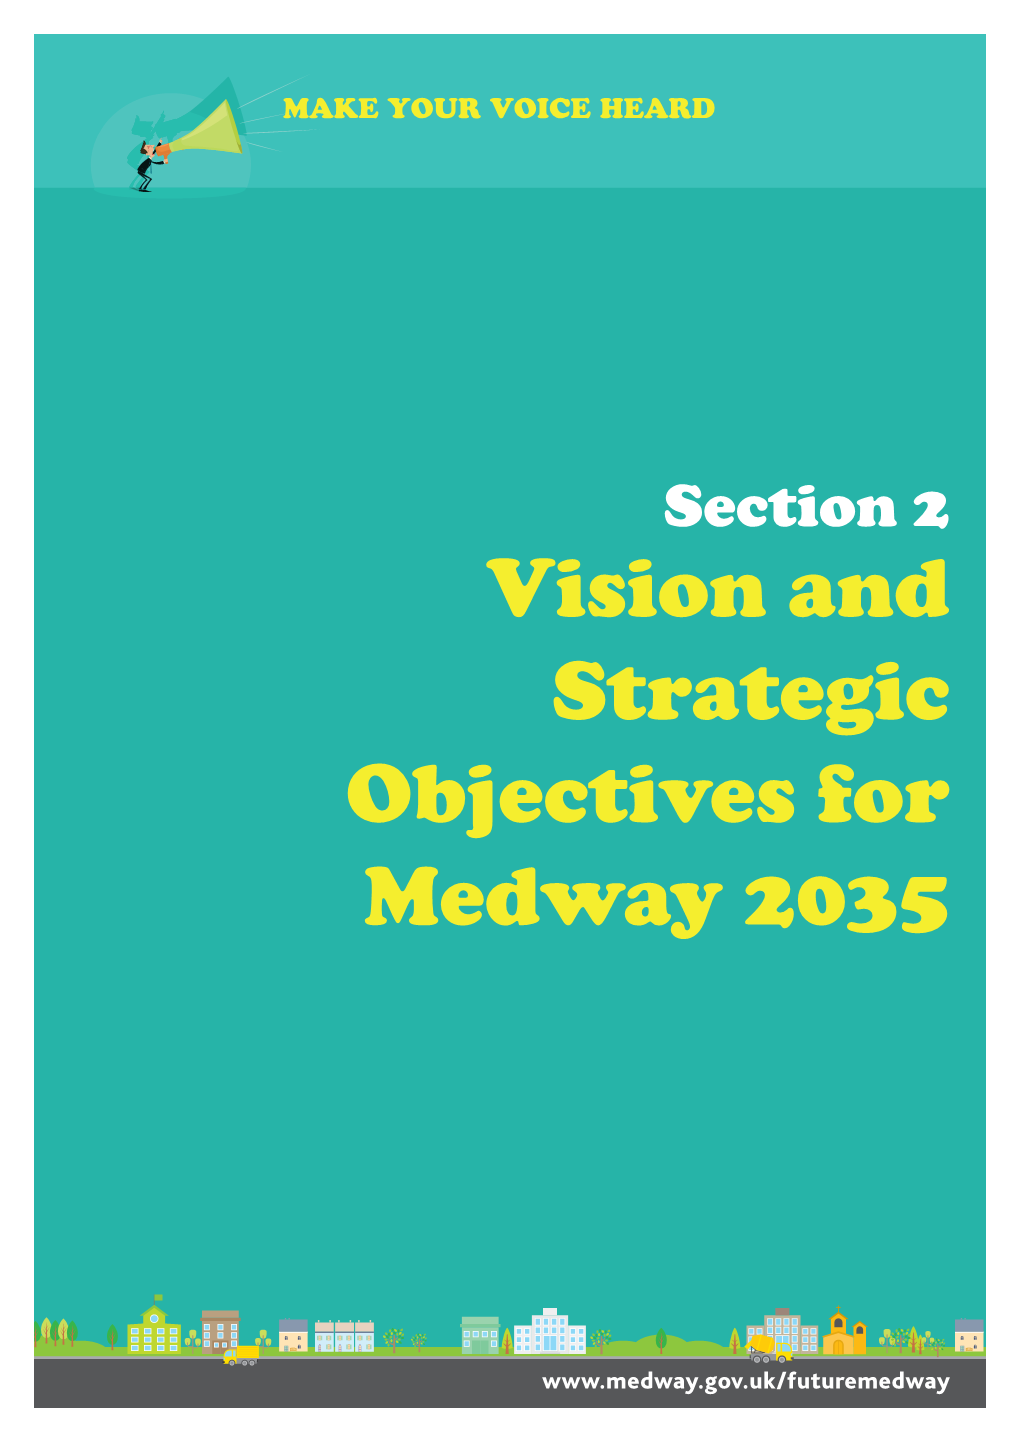 Vision and Strategic Objectives for Medway 2035